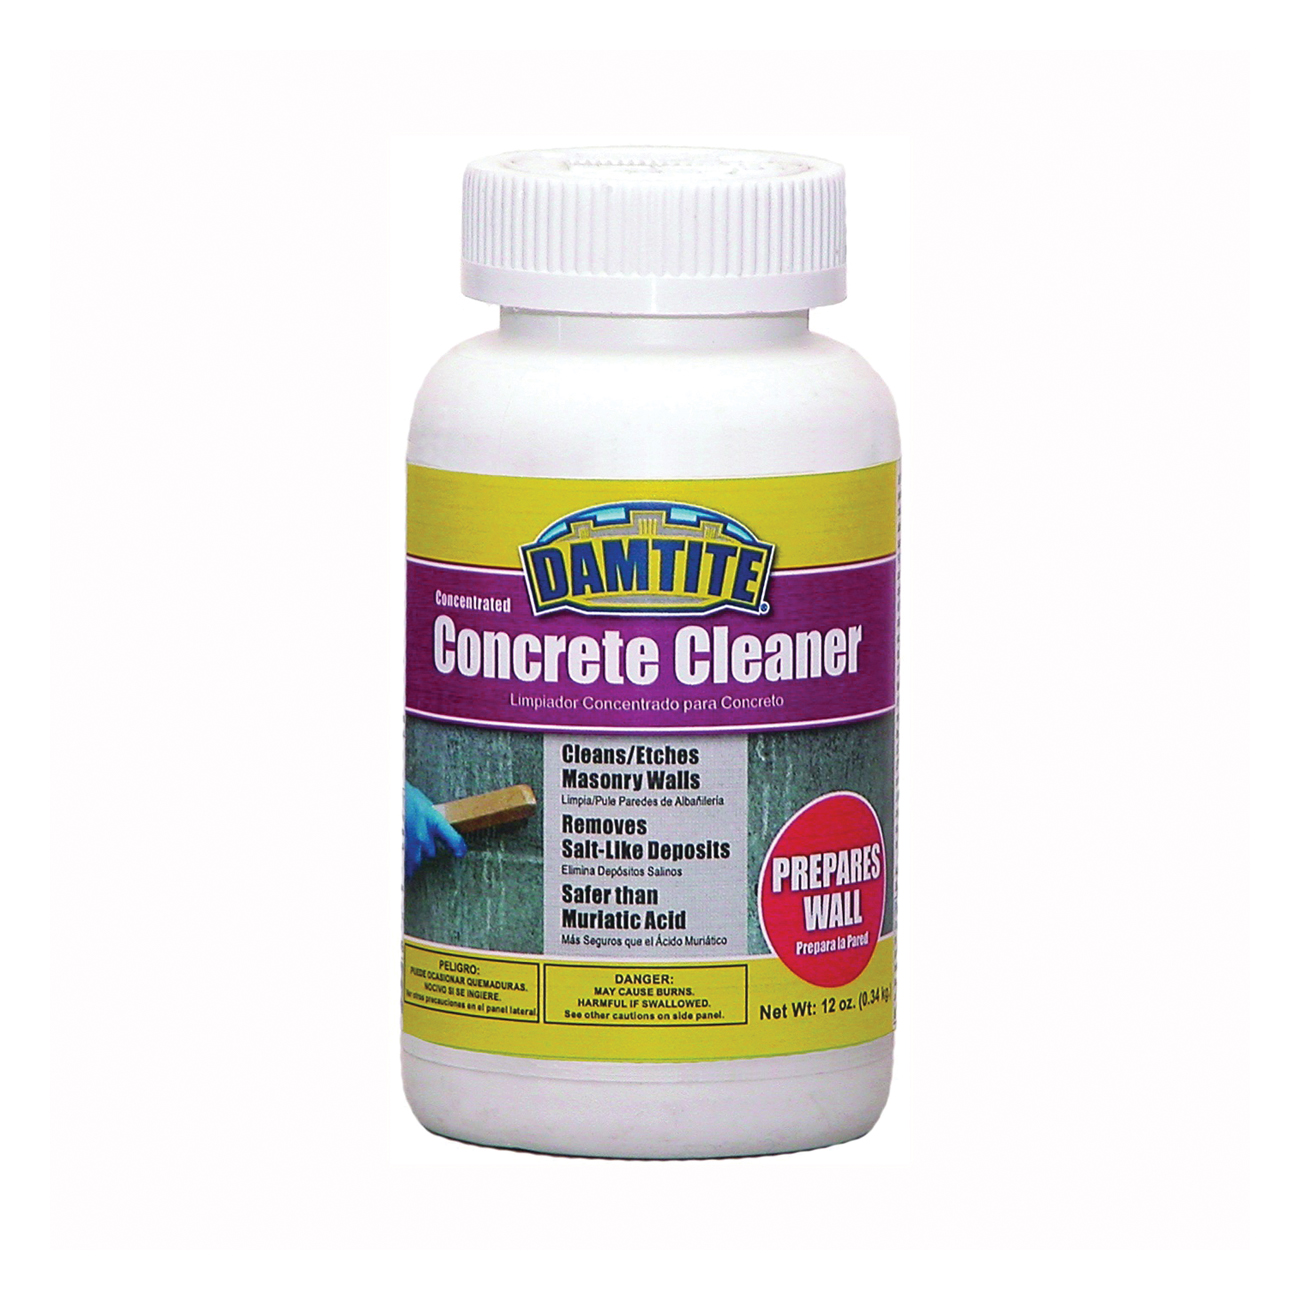 09712 Concrete Cleaner, Crystals, Odorless, Opaque White, 12 oz, Bottle